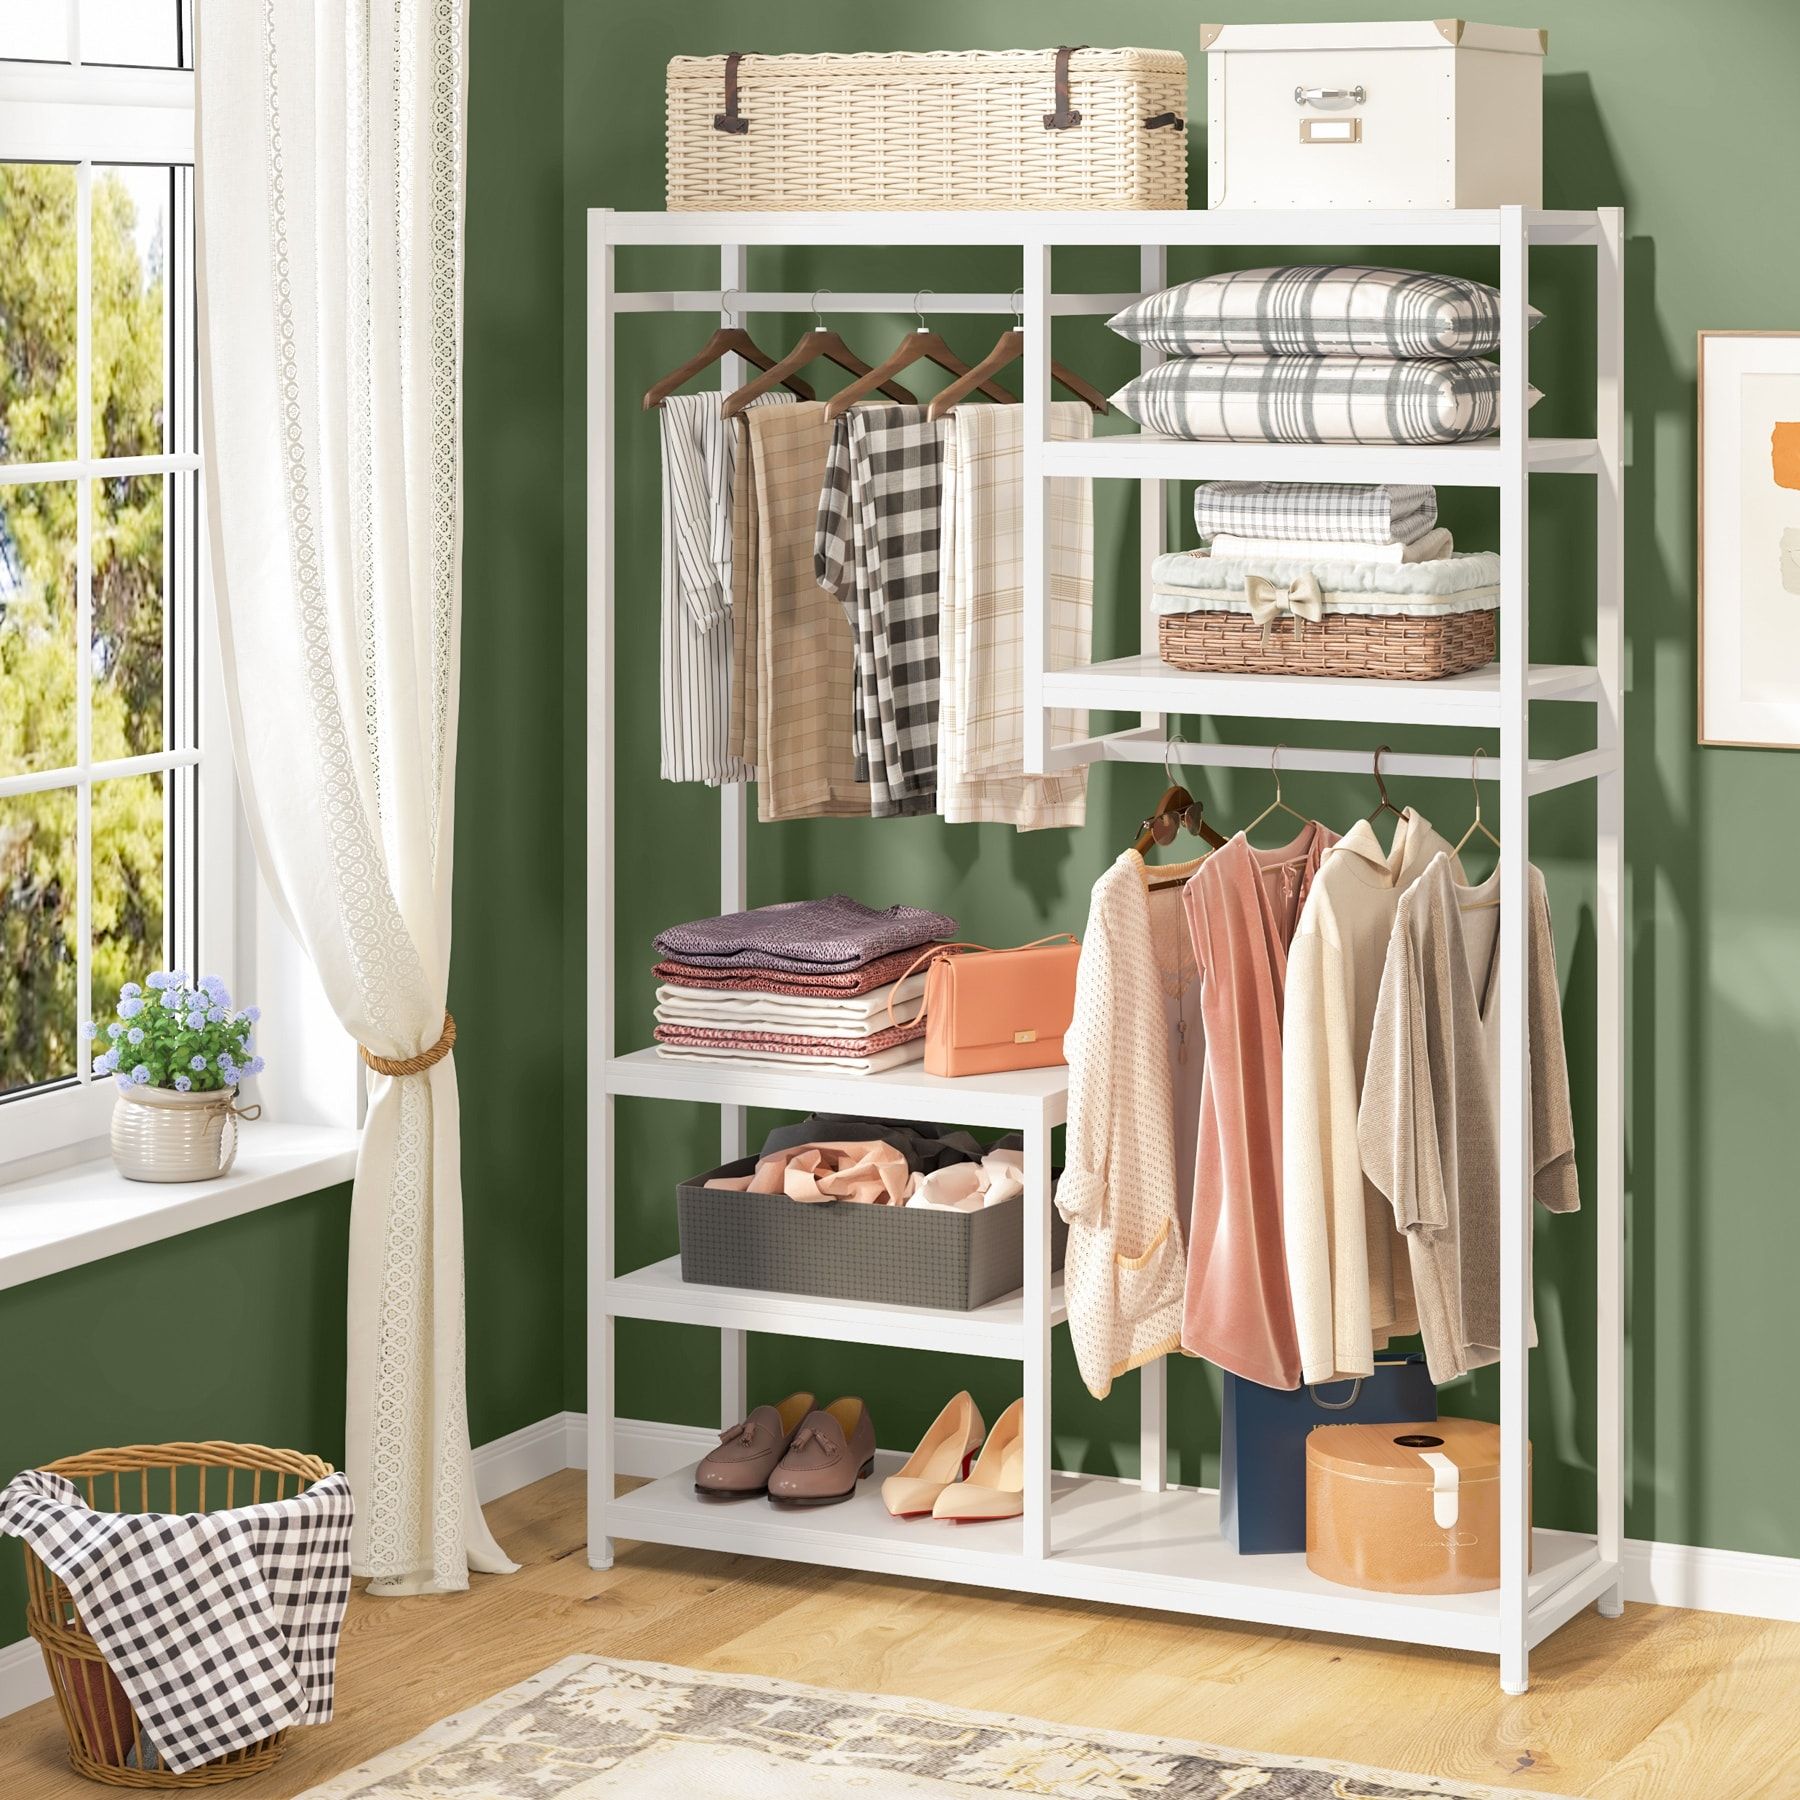 Free Standing Closet Organizer Double Hanging Rod Clothes Garment Racks –  Bed Bath & Beyond – 30537676 With Wardrobes With 3 Hanging Rod (View 8 of 15)